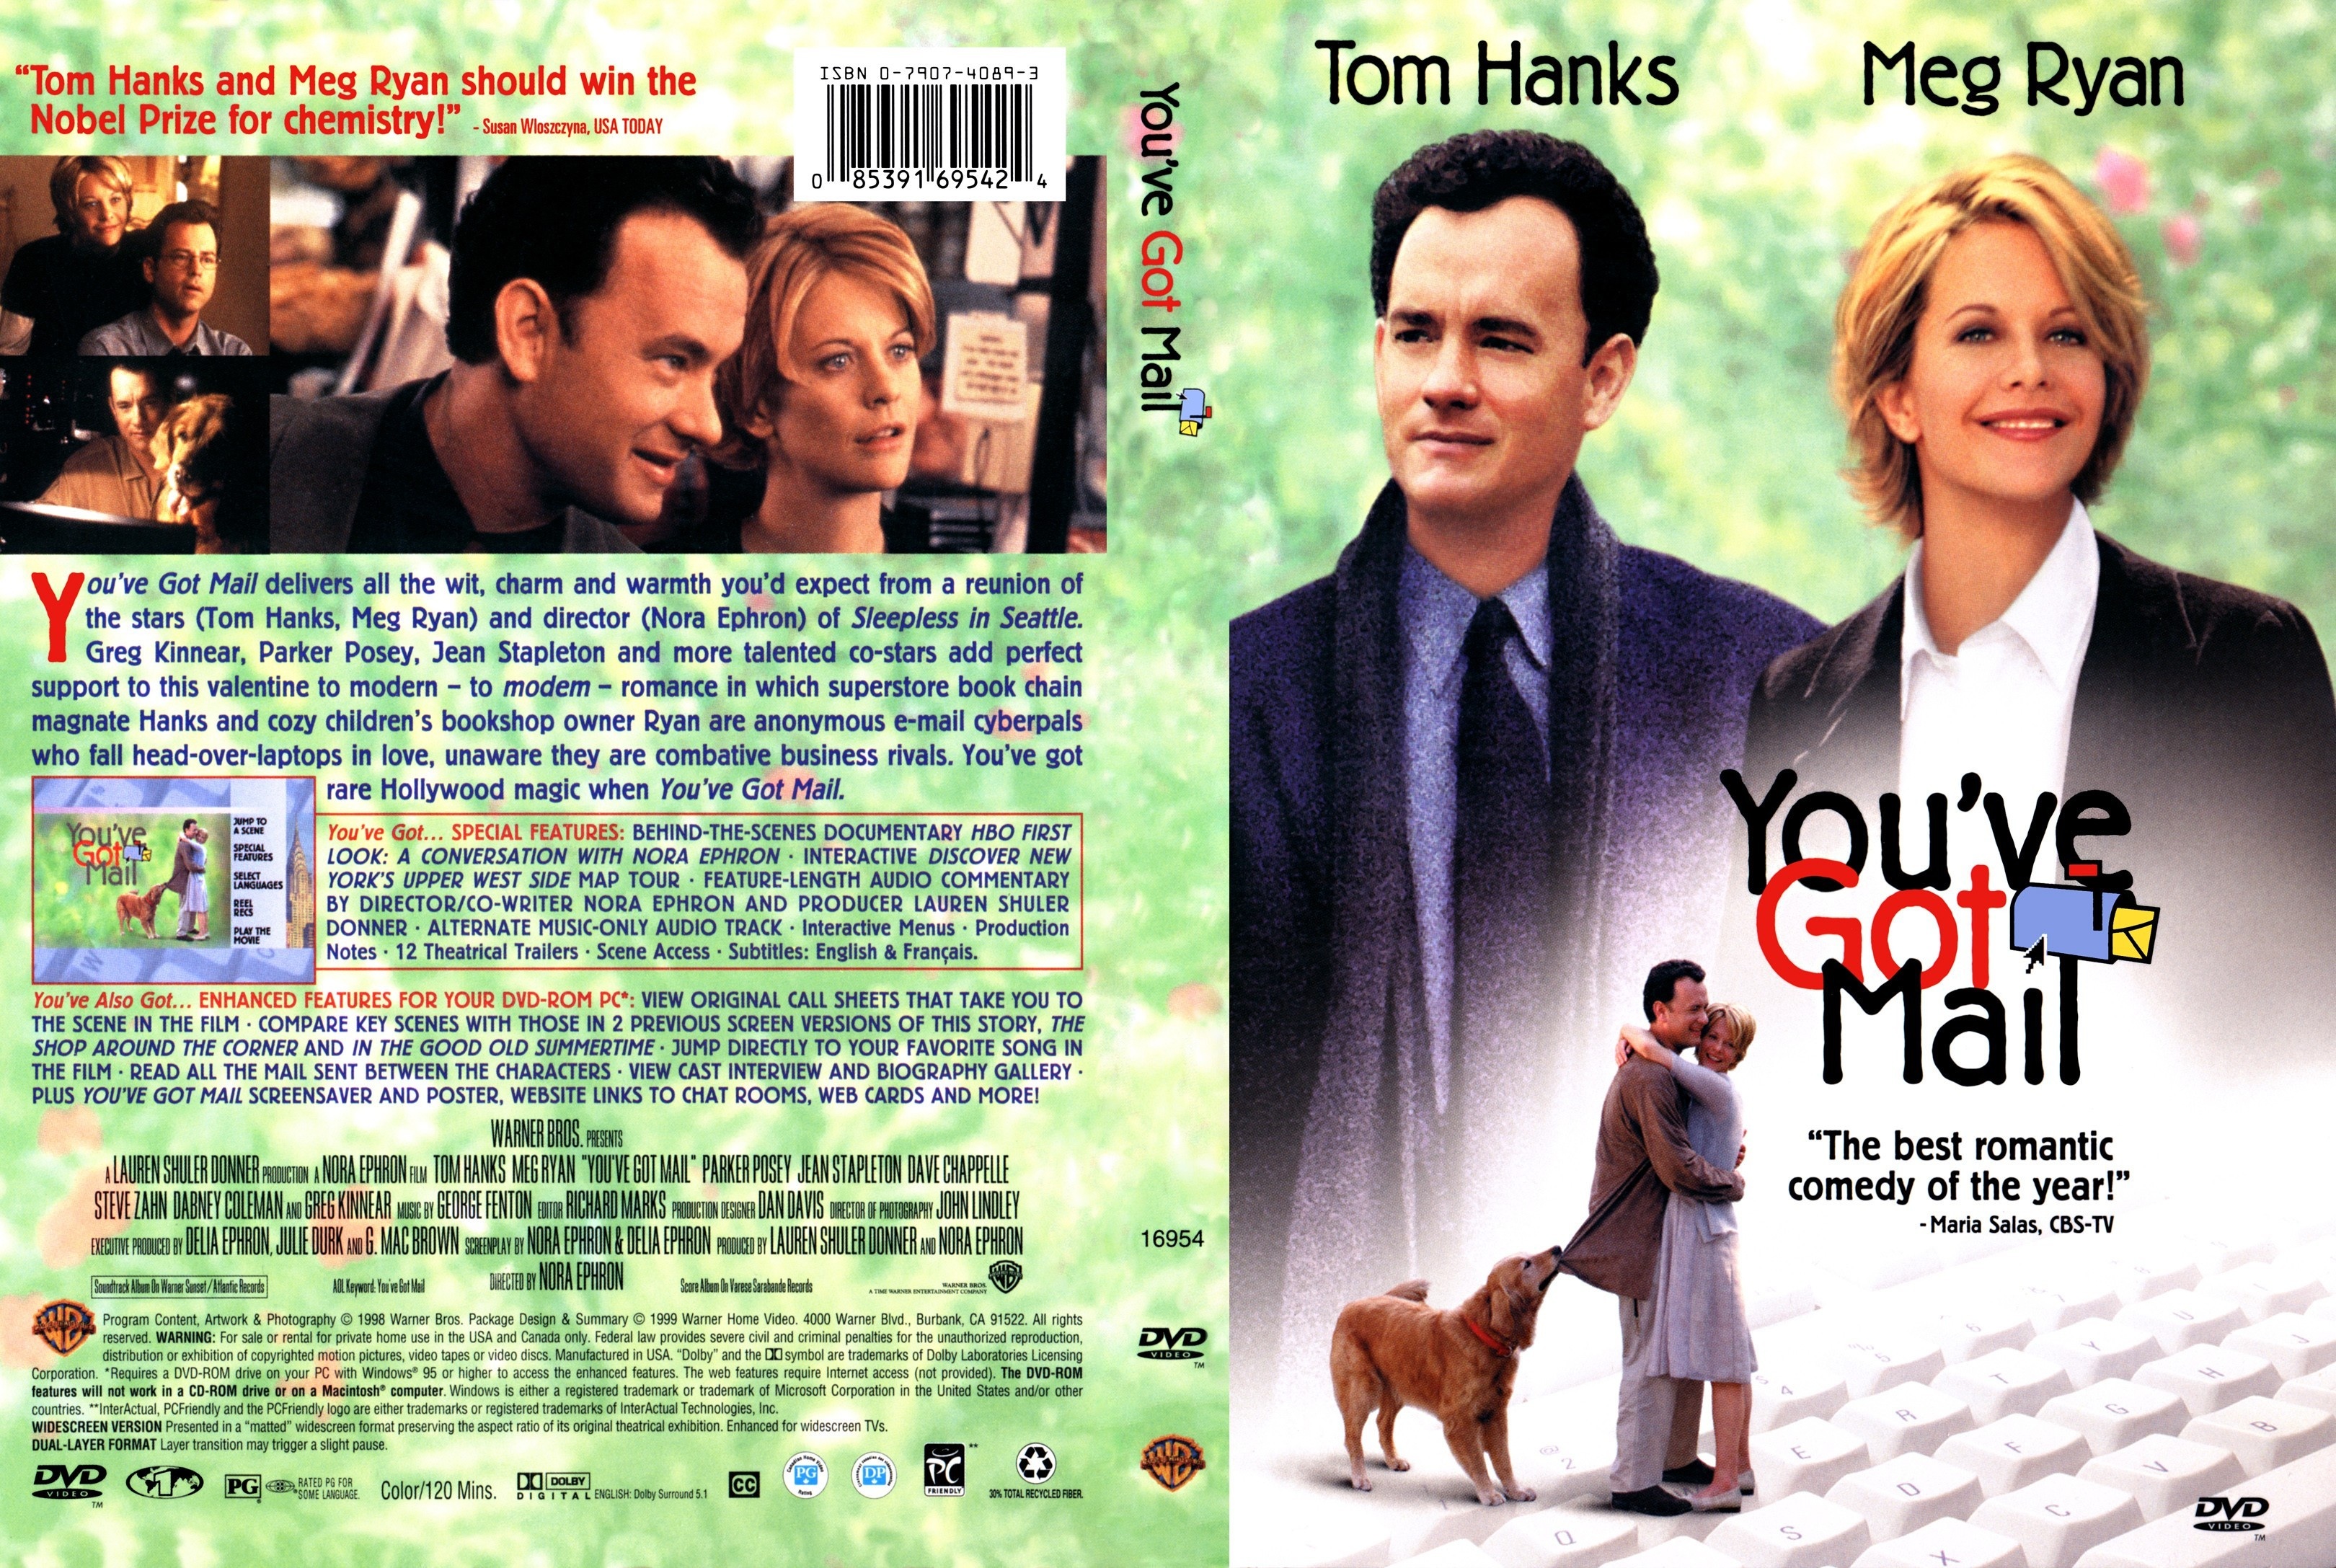 Mail movies. You've got mail 1998. Вам письмо you've got mail.